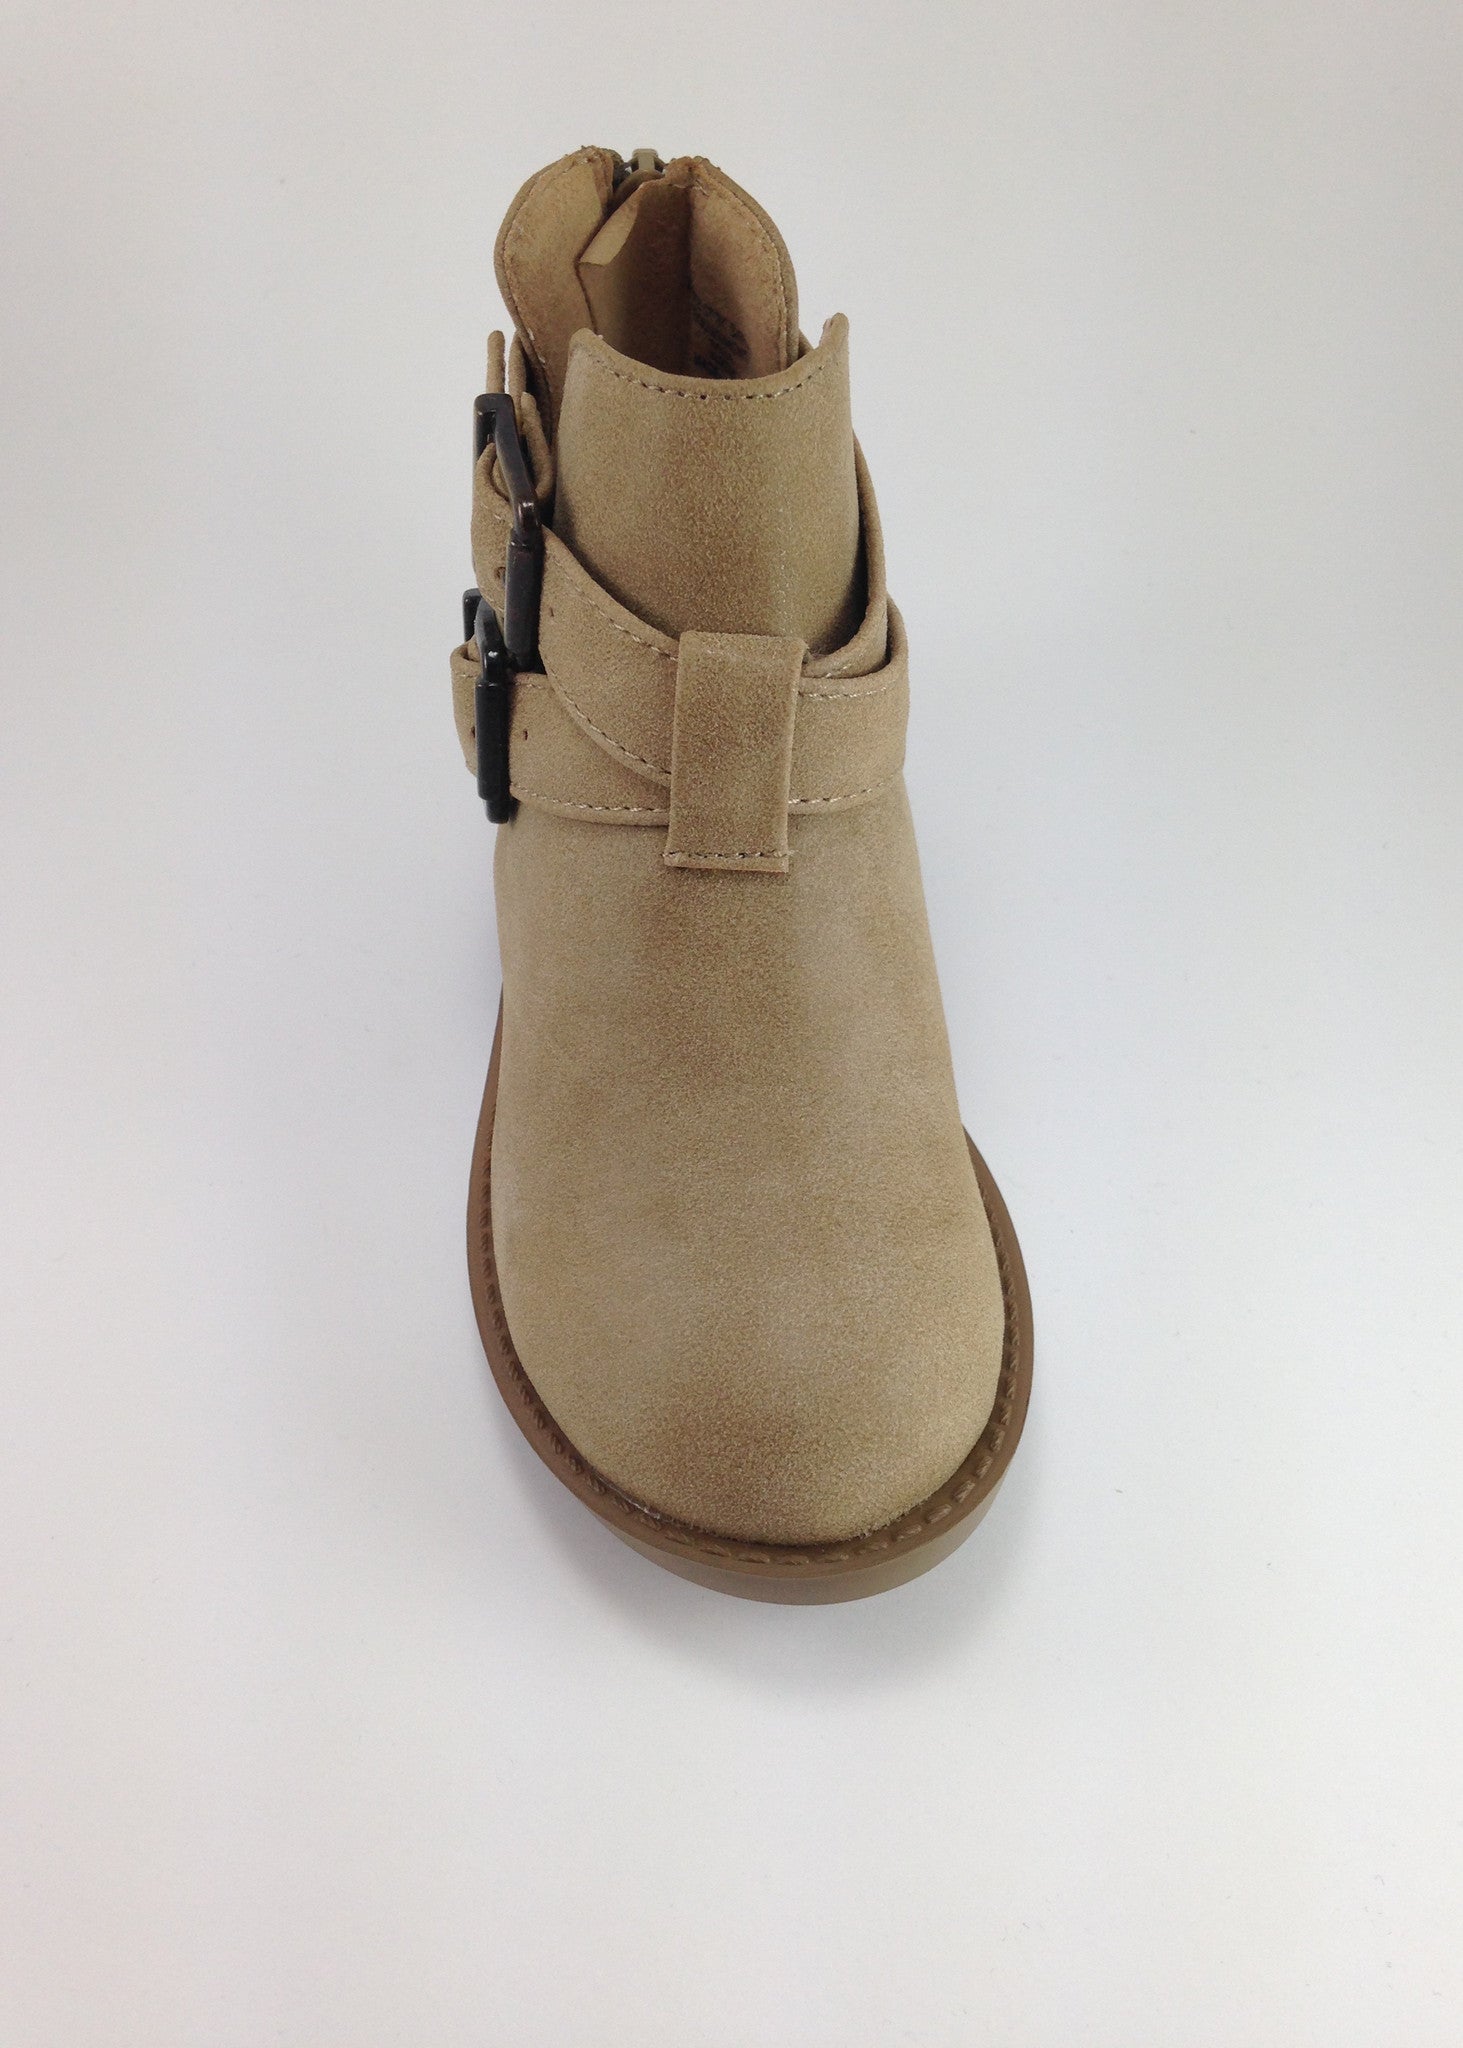 Girls Tan Ankle Boots | Girls Shoes 